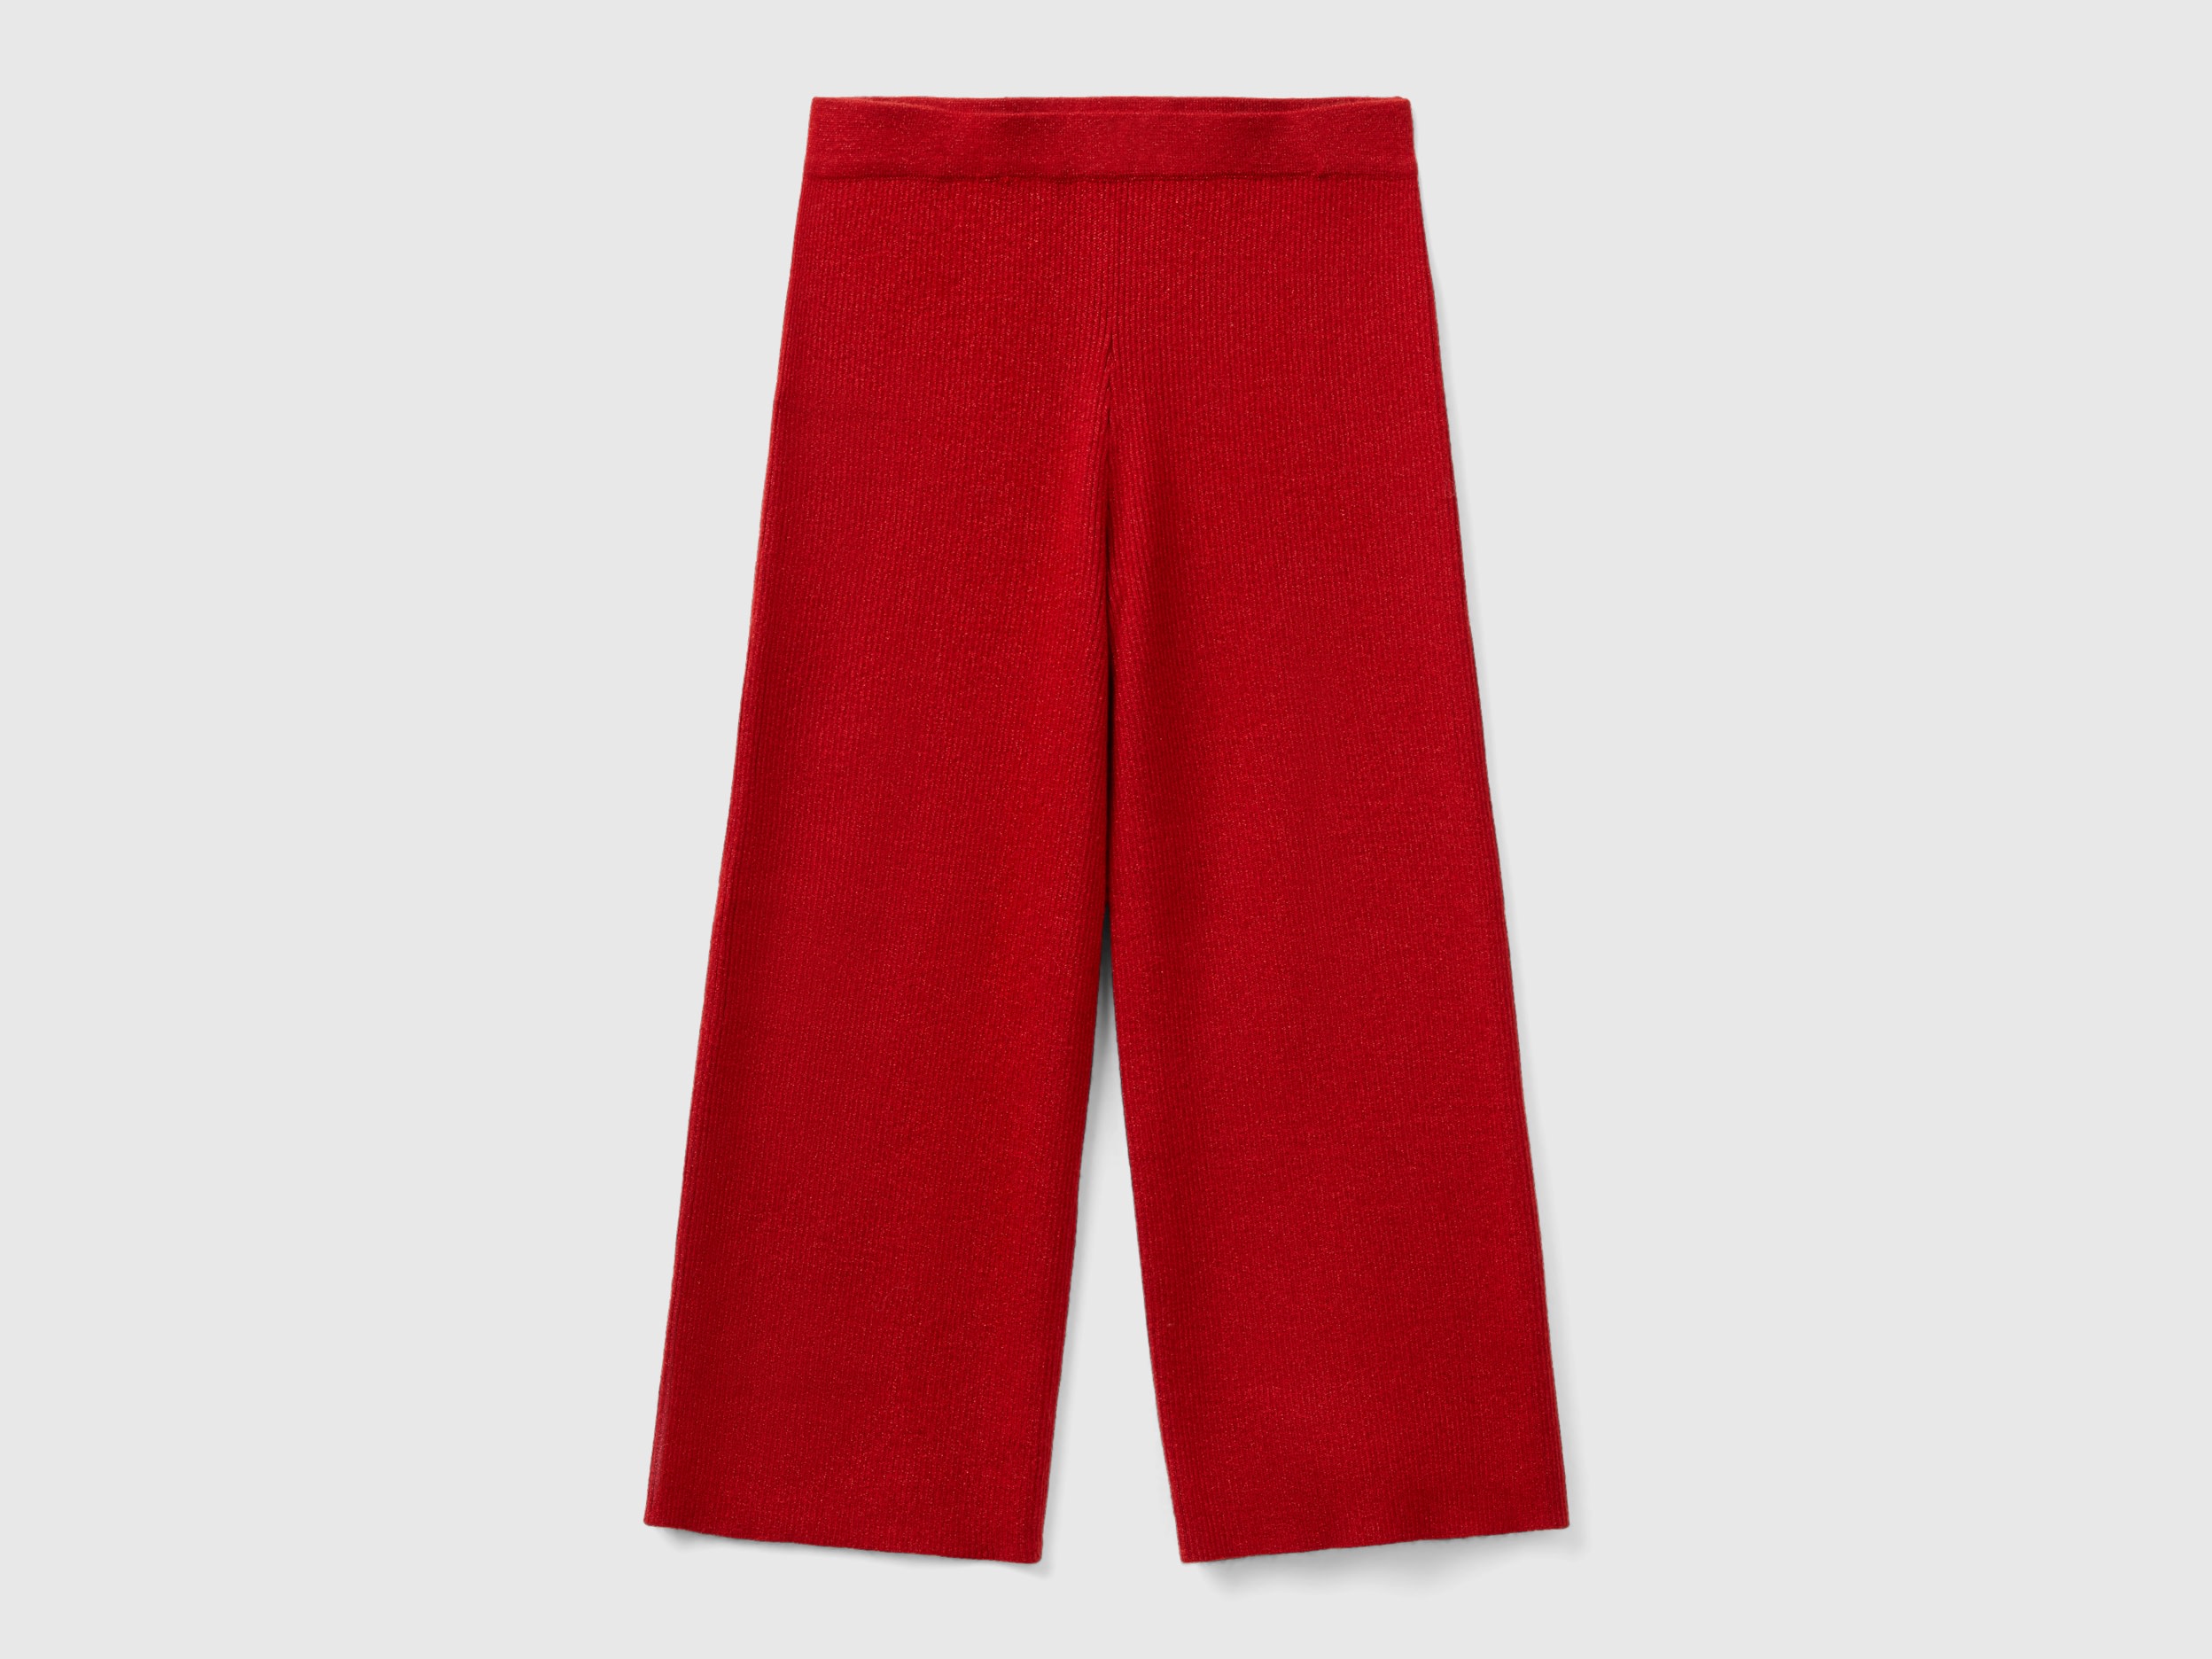 Benetton, Knit Pants With Lurex, size 2XL, Red, Kids